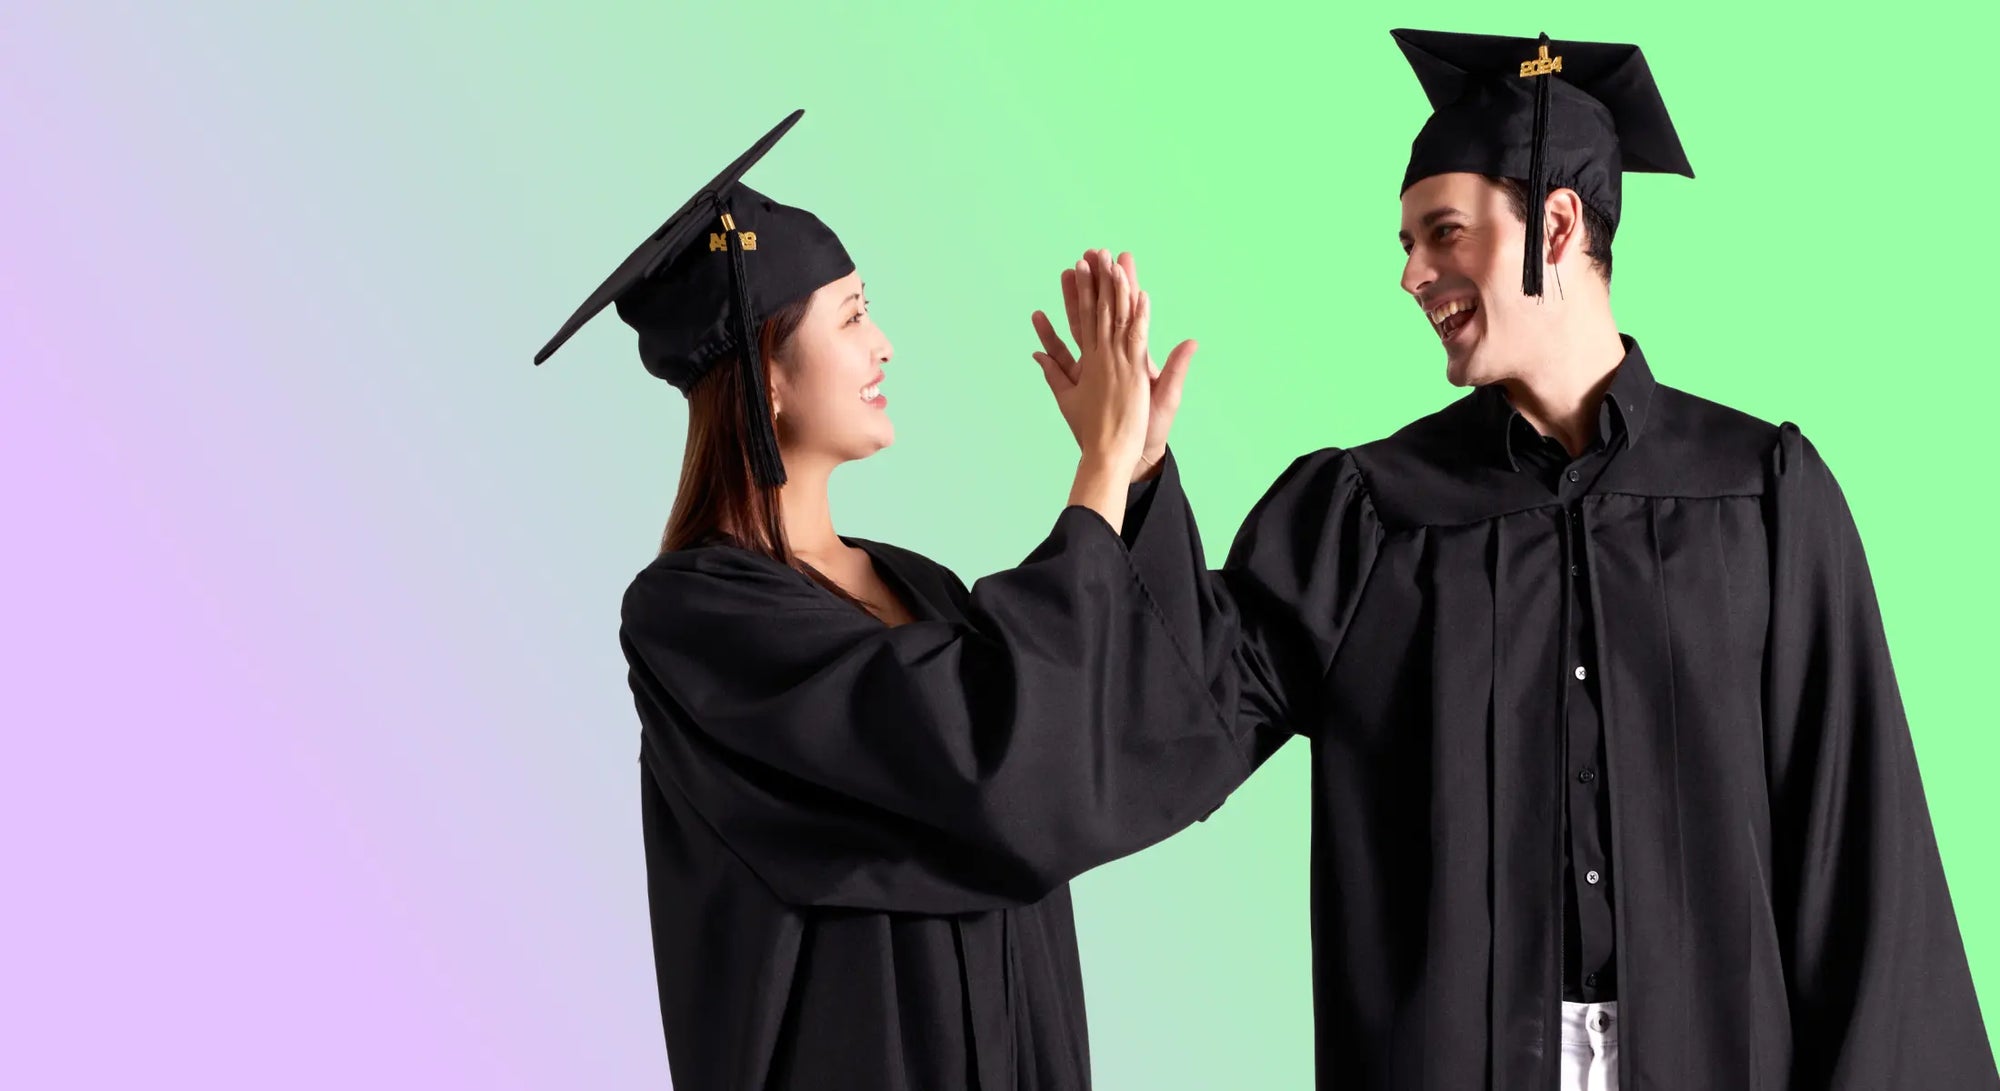 Male and female graduates wearing gowns and caps celebrate graduation with a high five.